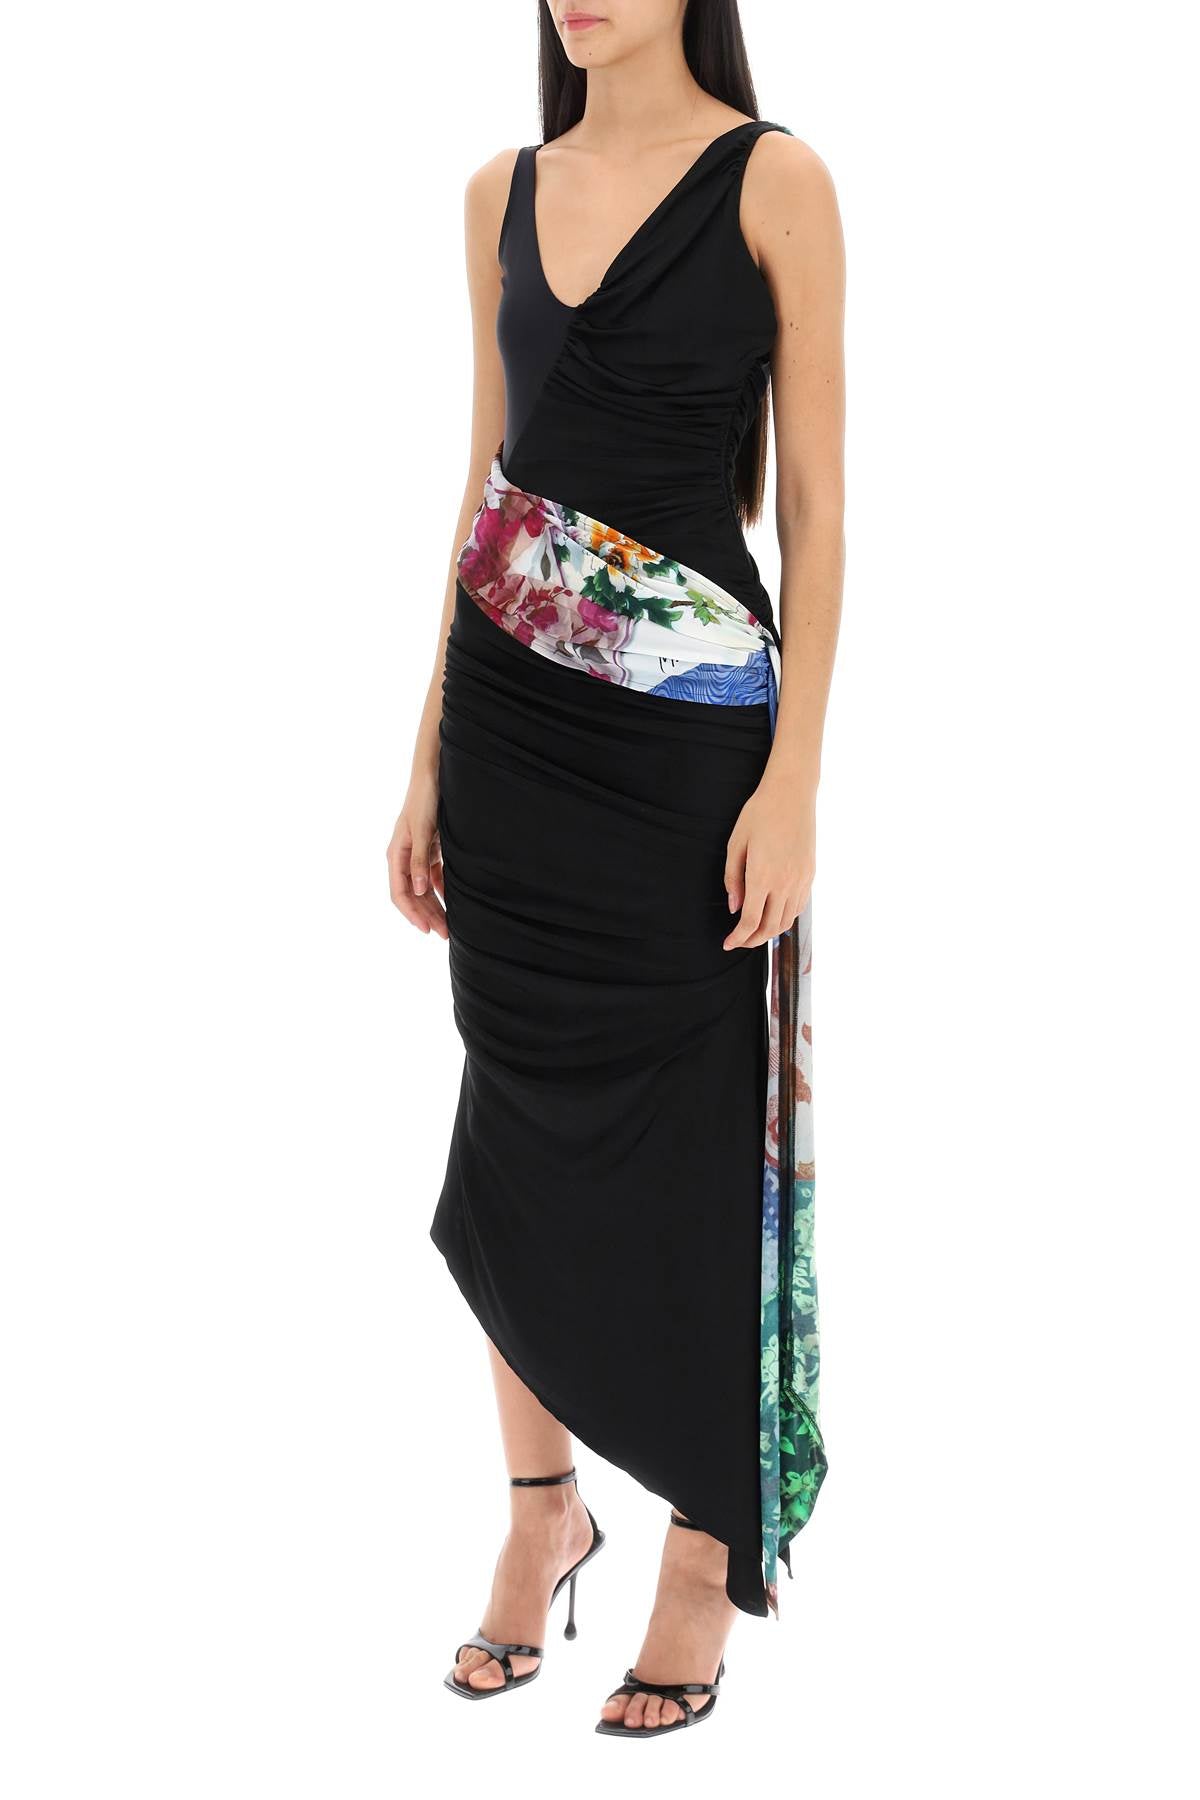 Marine serre dress in draped jersey with contrasting sash-3